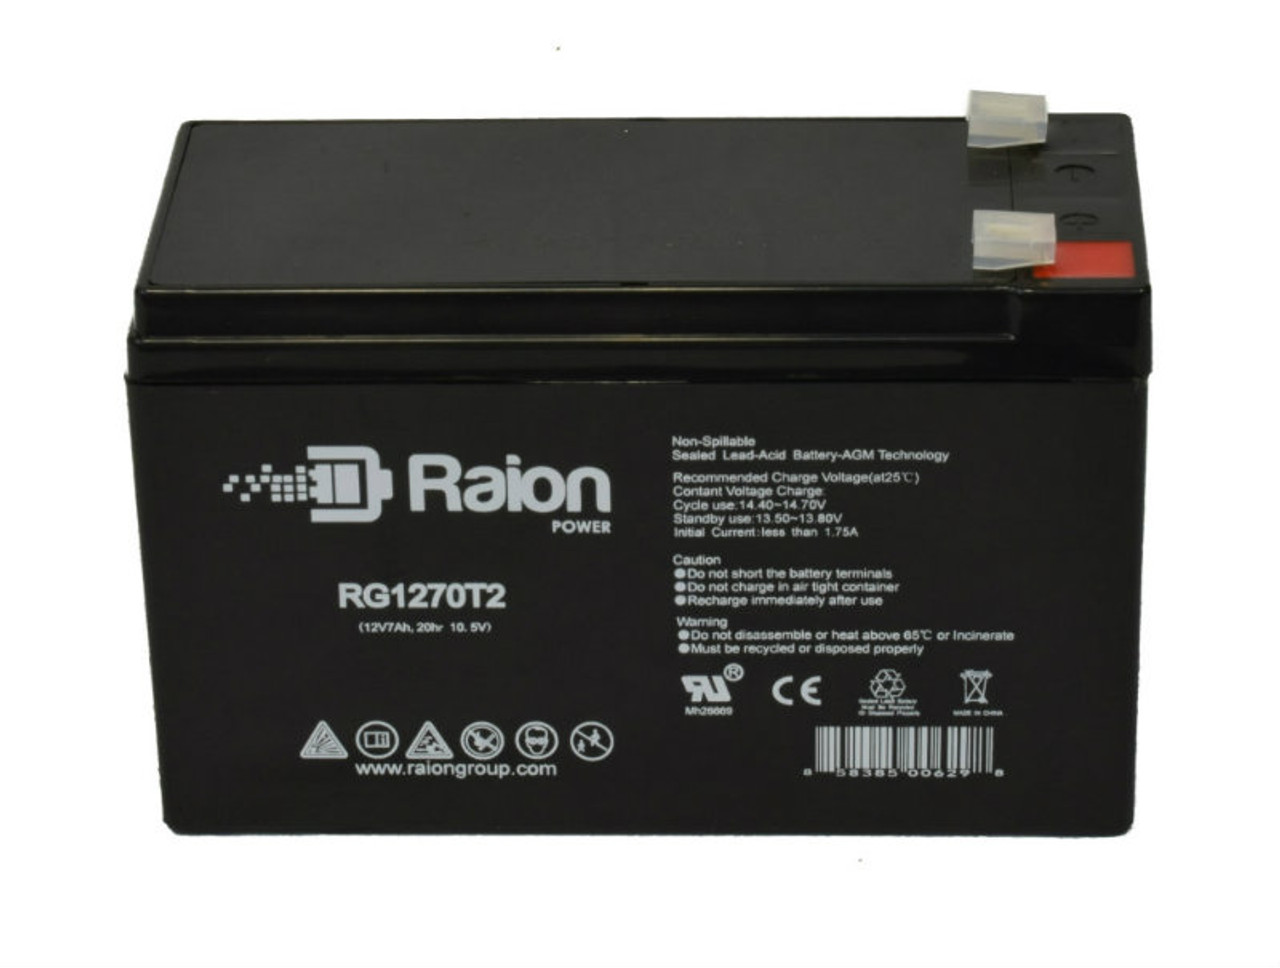 Raion Power RG1270T1 12V 7Ah Lead Acid Battery for Altronix SMP7PMCTXPD16